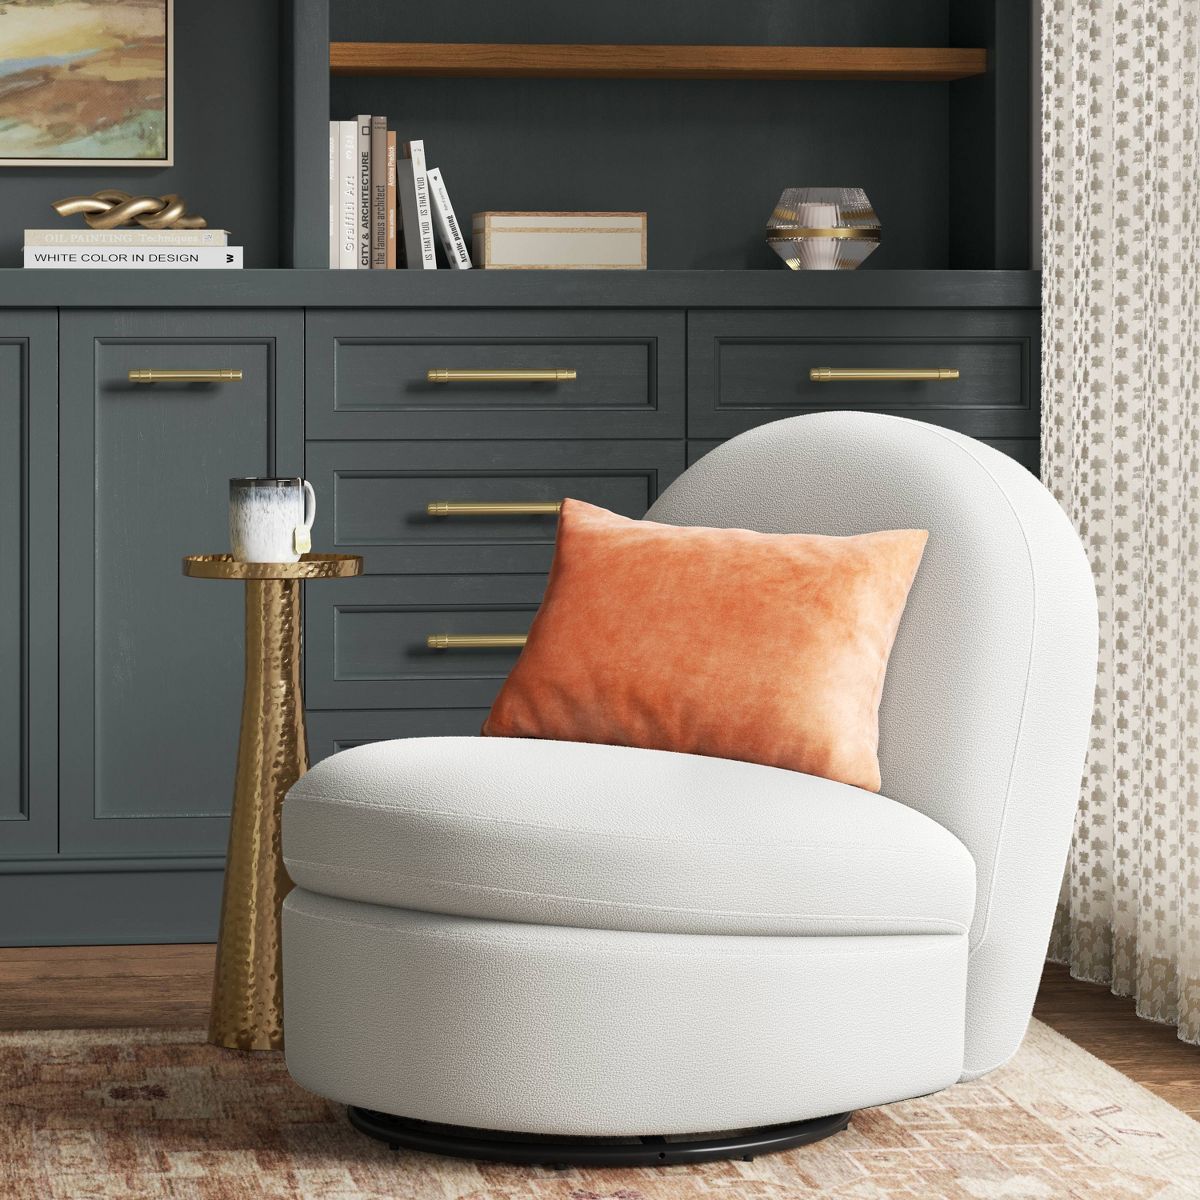 Rounded Swivel Accent Chair metal base Tan/Black - Threshold™ | Target